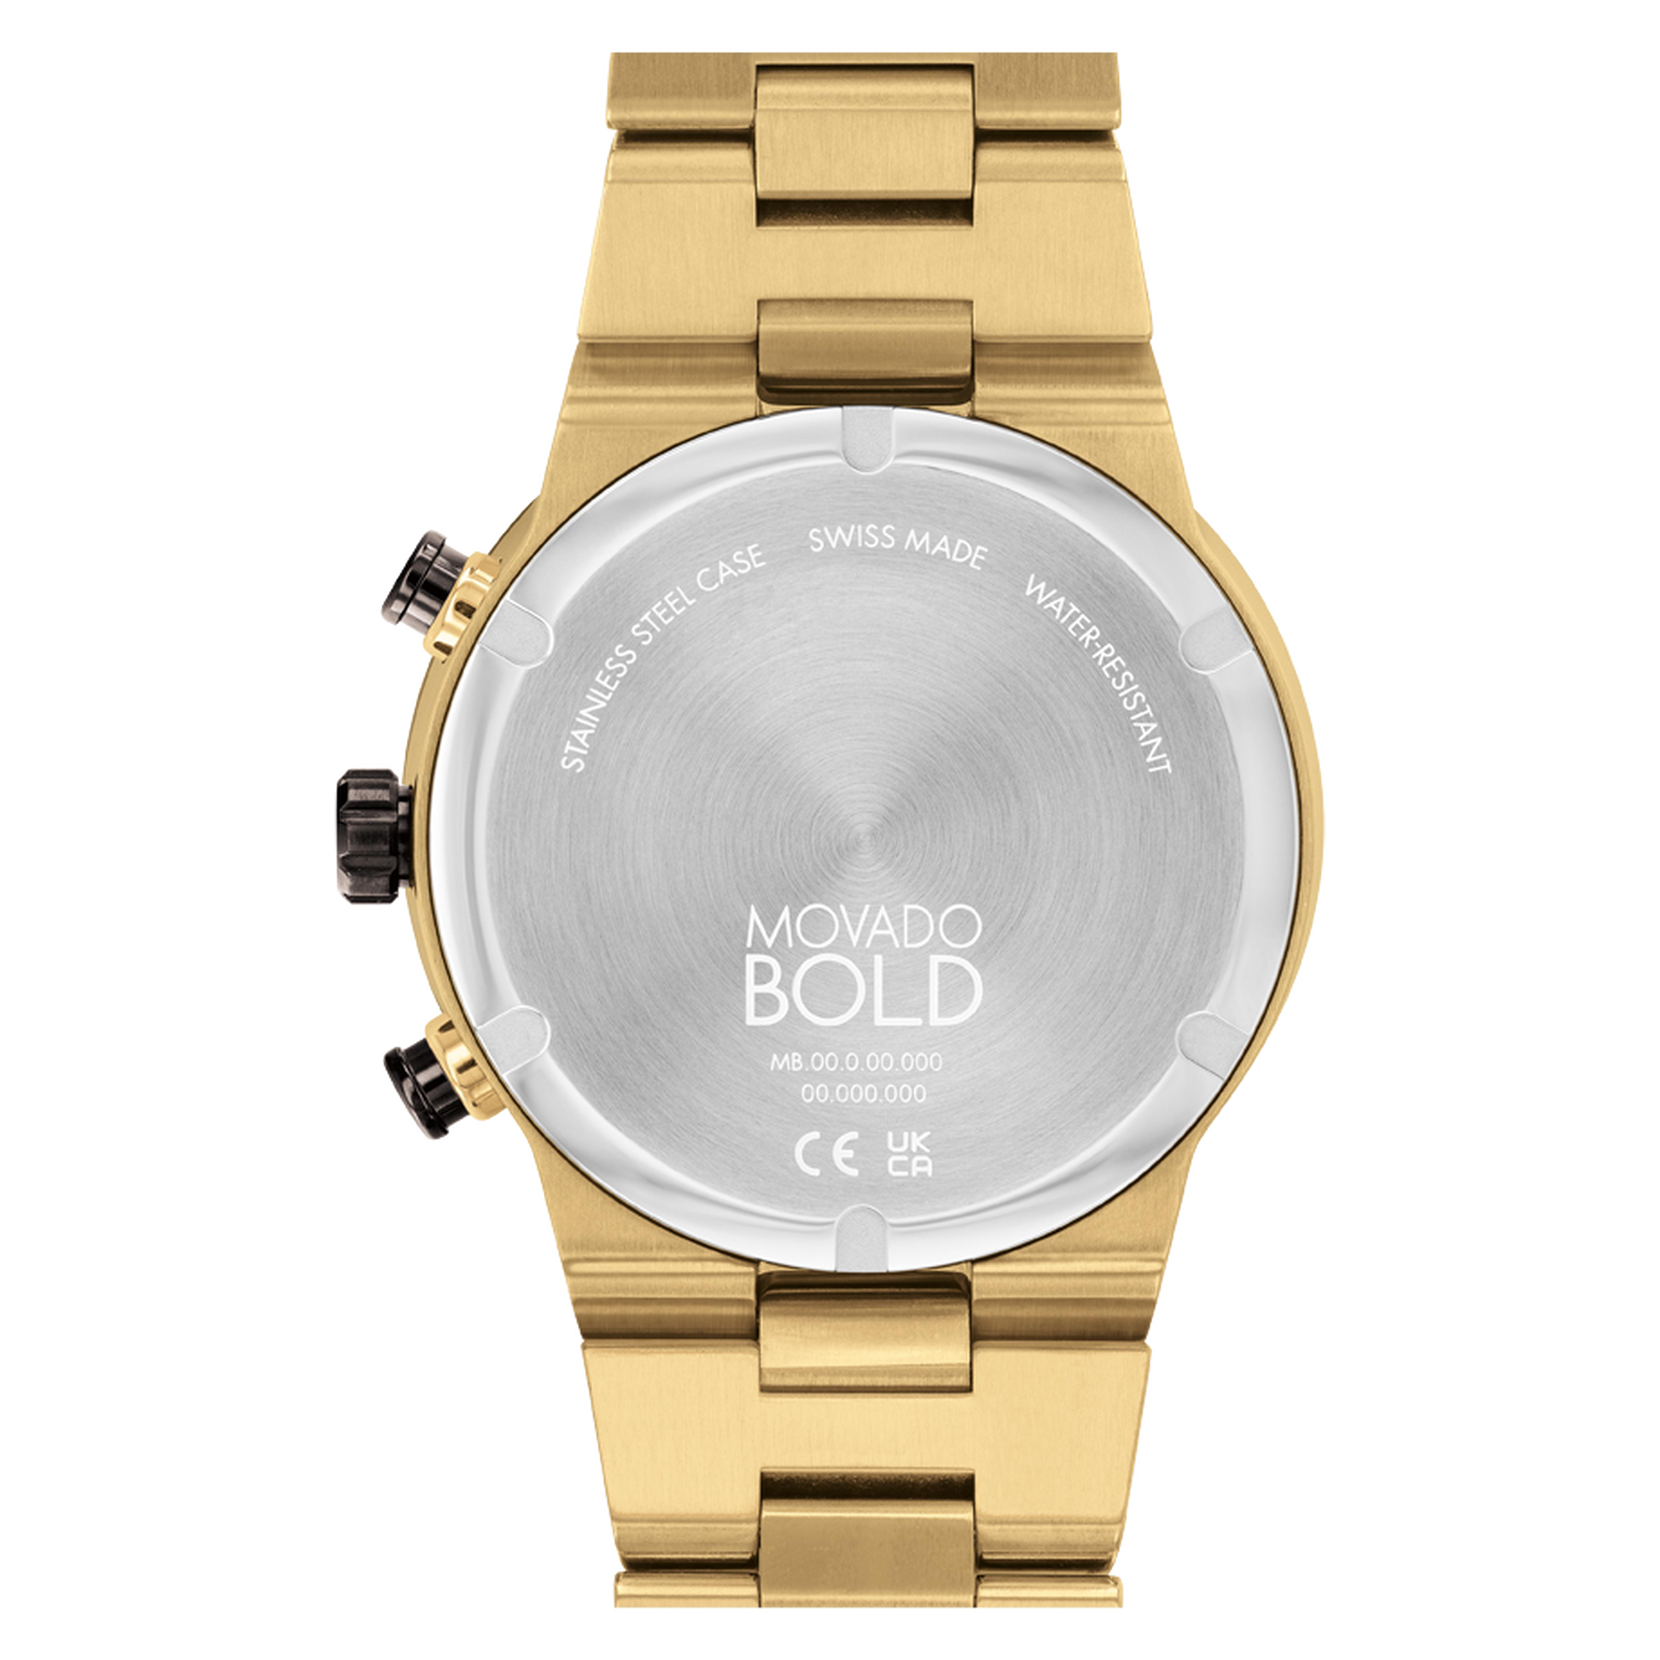 Movado | Movado BOLD Fusion Chronograph Watch with yellow gold 